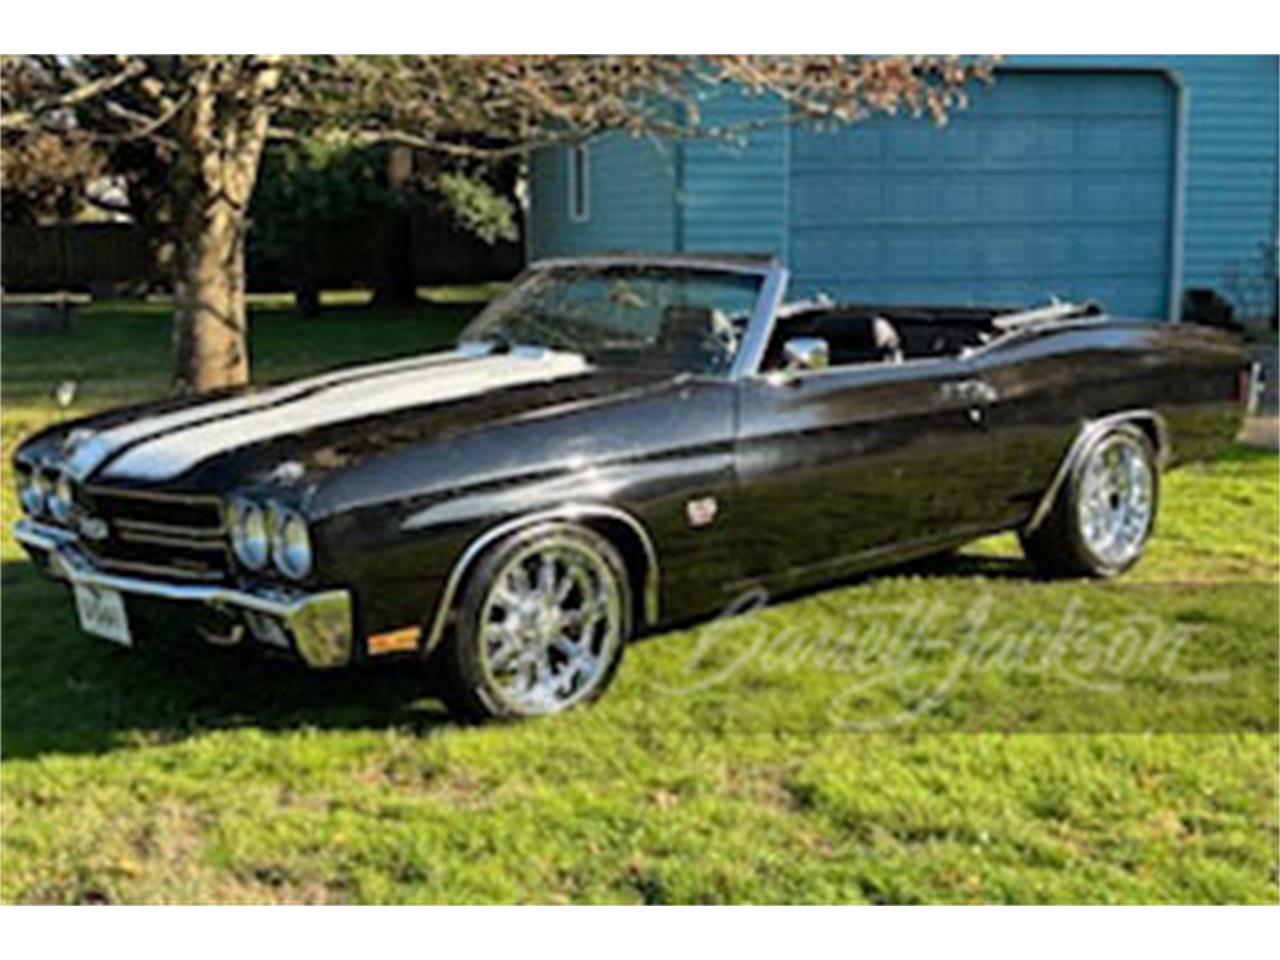 For Sale at Auction: 1970 Chevrolet Chevelle in Scottsdale, Arizona for sale in Scottsdale, AZ